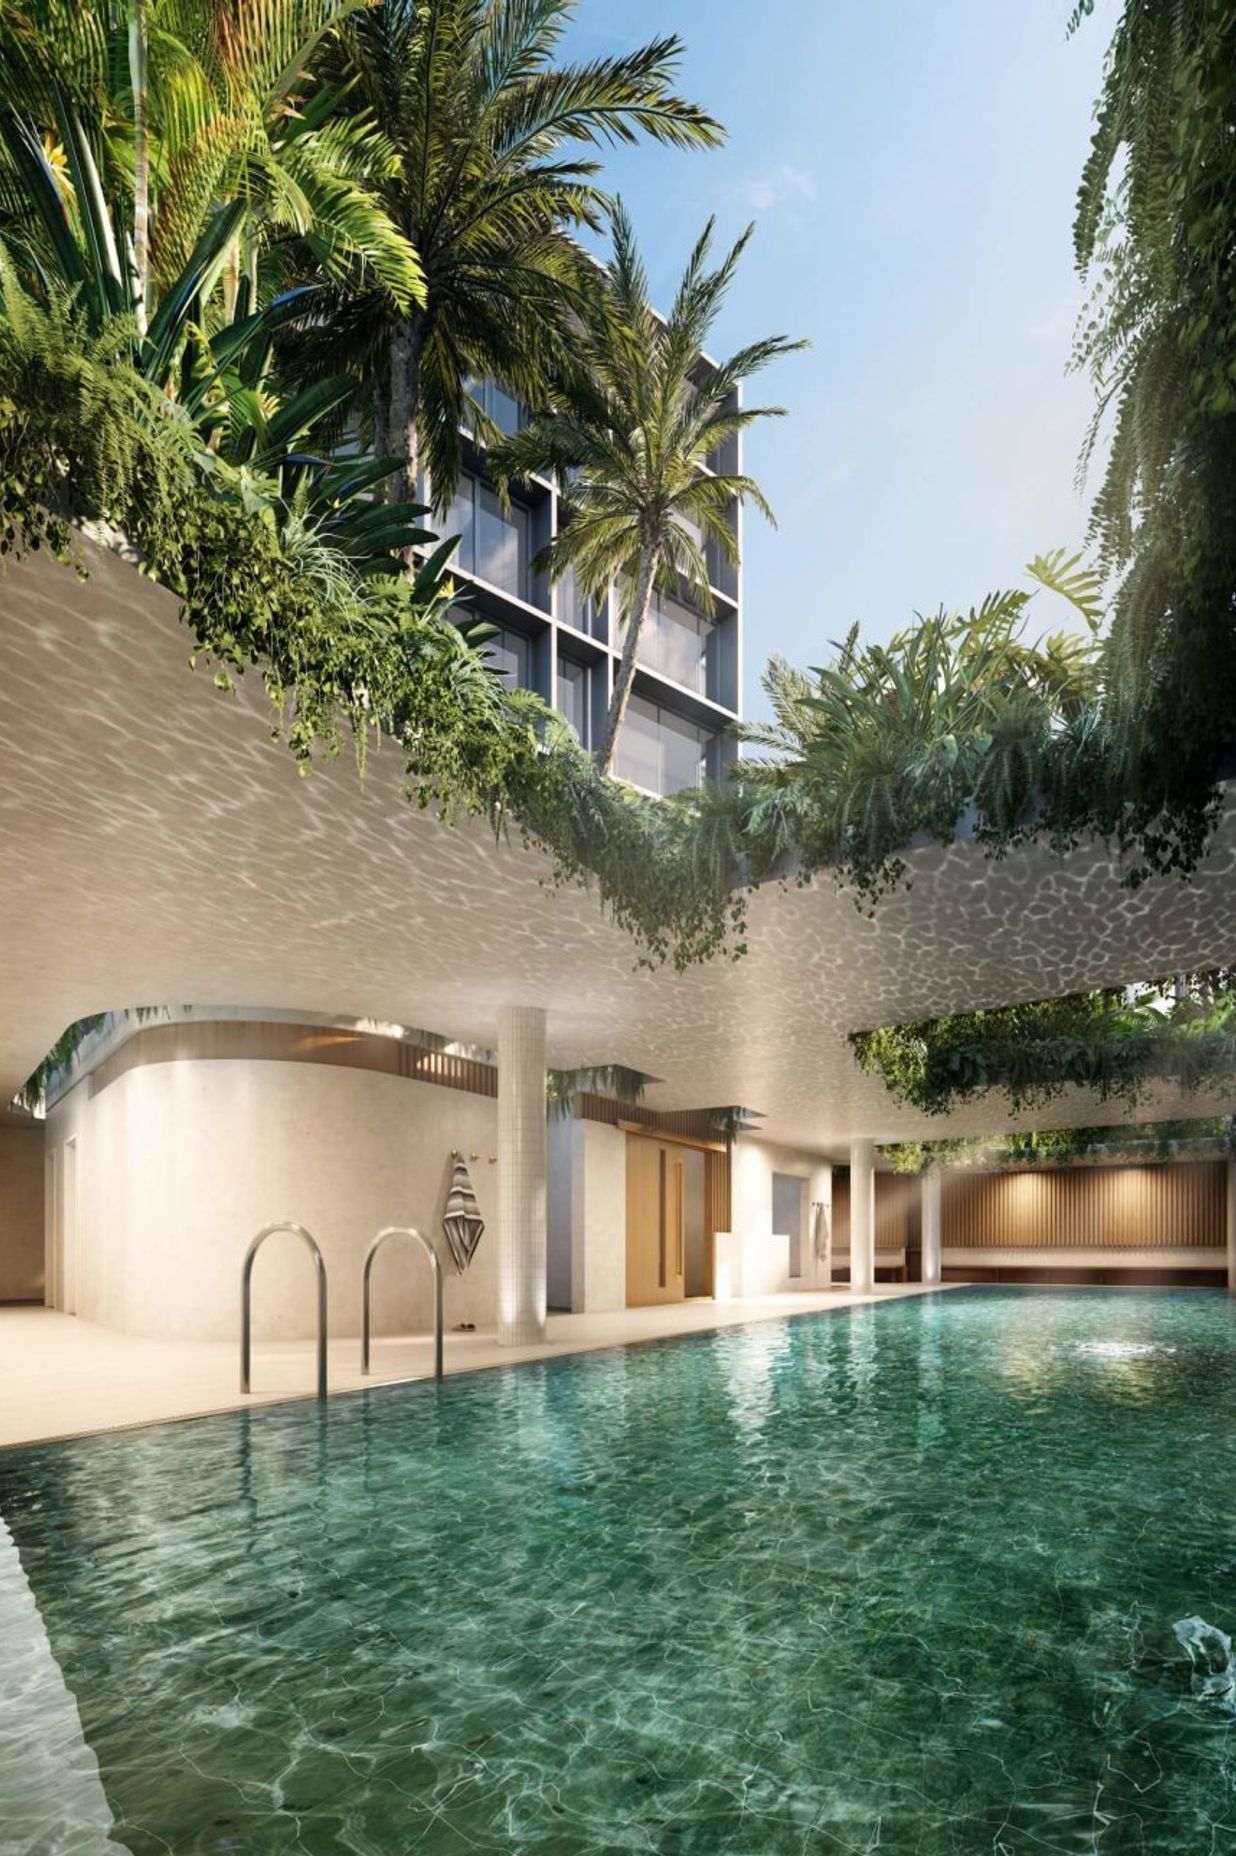 The pavilions above the semi-covered indoor/outdoor pool are planted with greenery that will drape down over the pool.